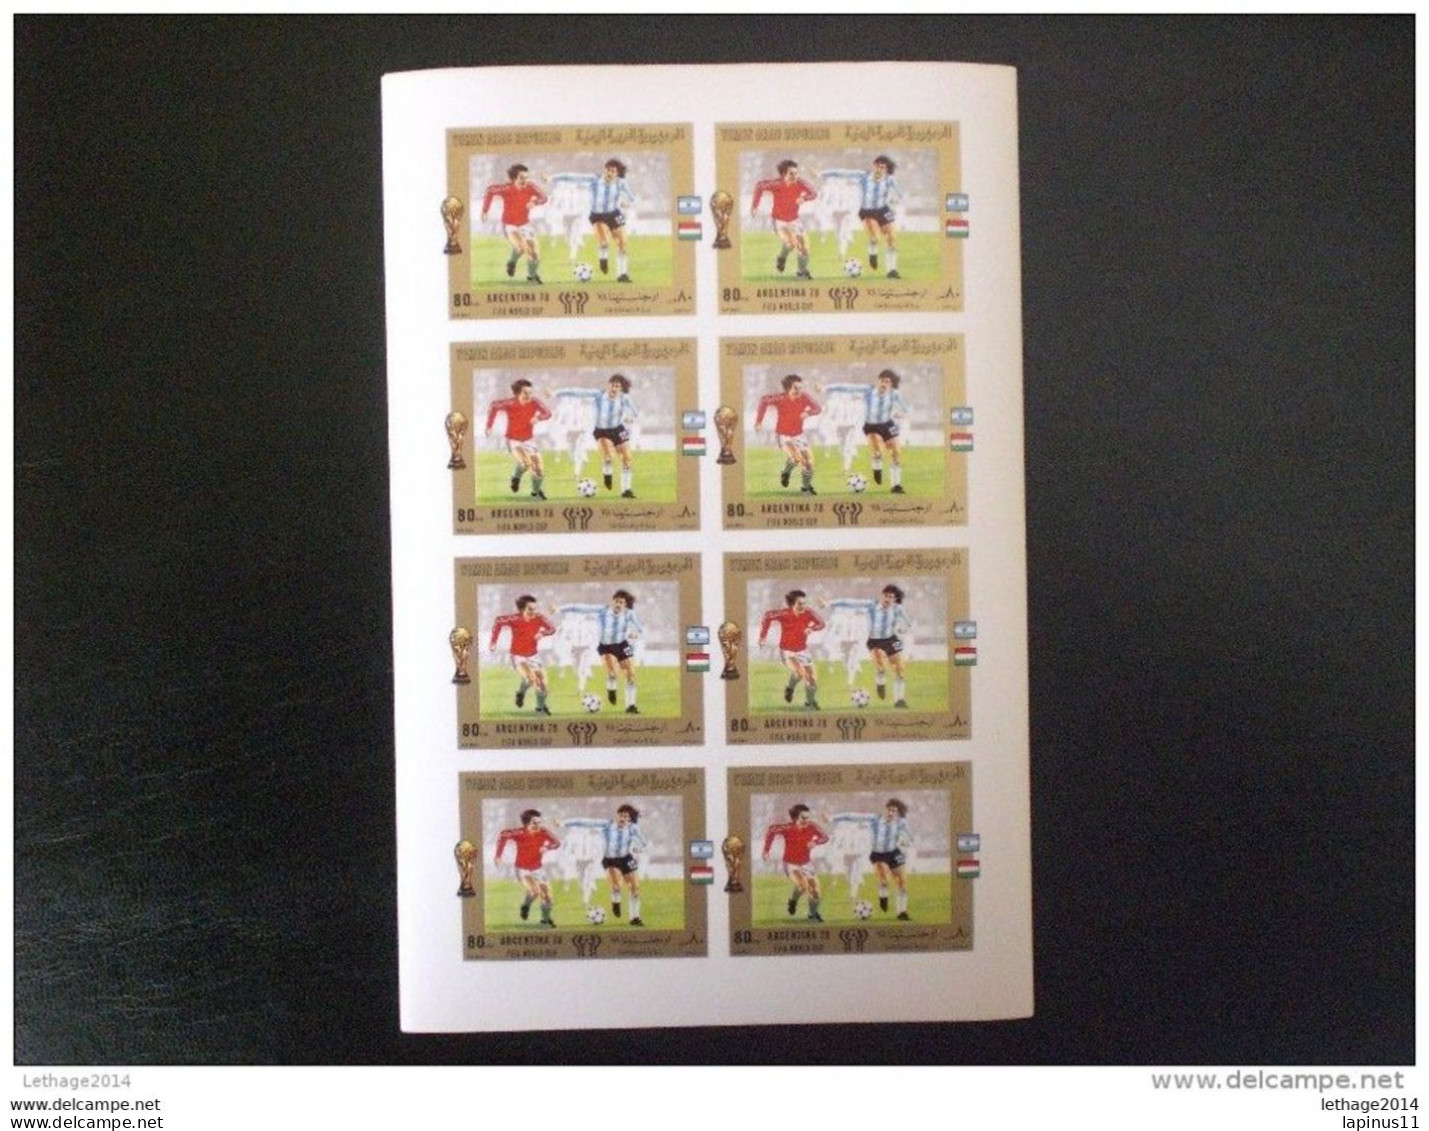 YEMEN 1980 Football World Cup - Argentina 1978 8 sheet x 8 complete series IMPERF RARE !! MNH 800,00 EURO CATALOG MICHEL